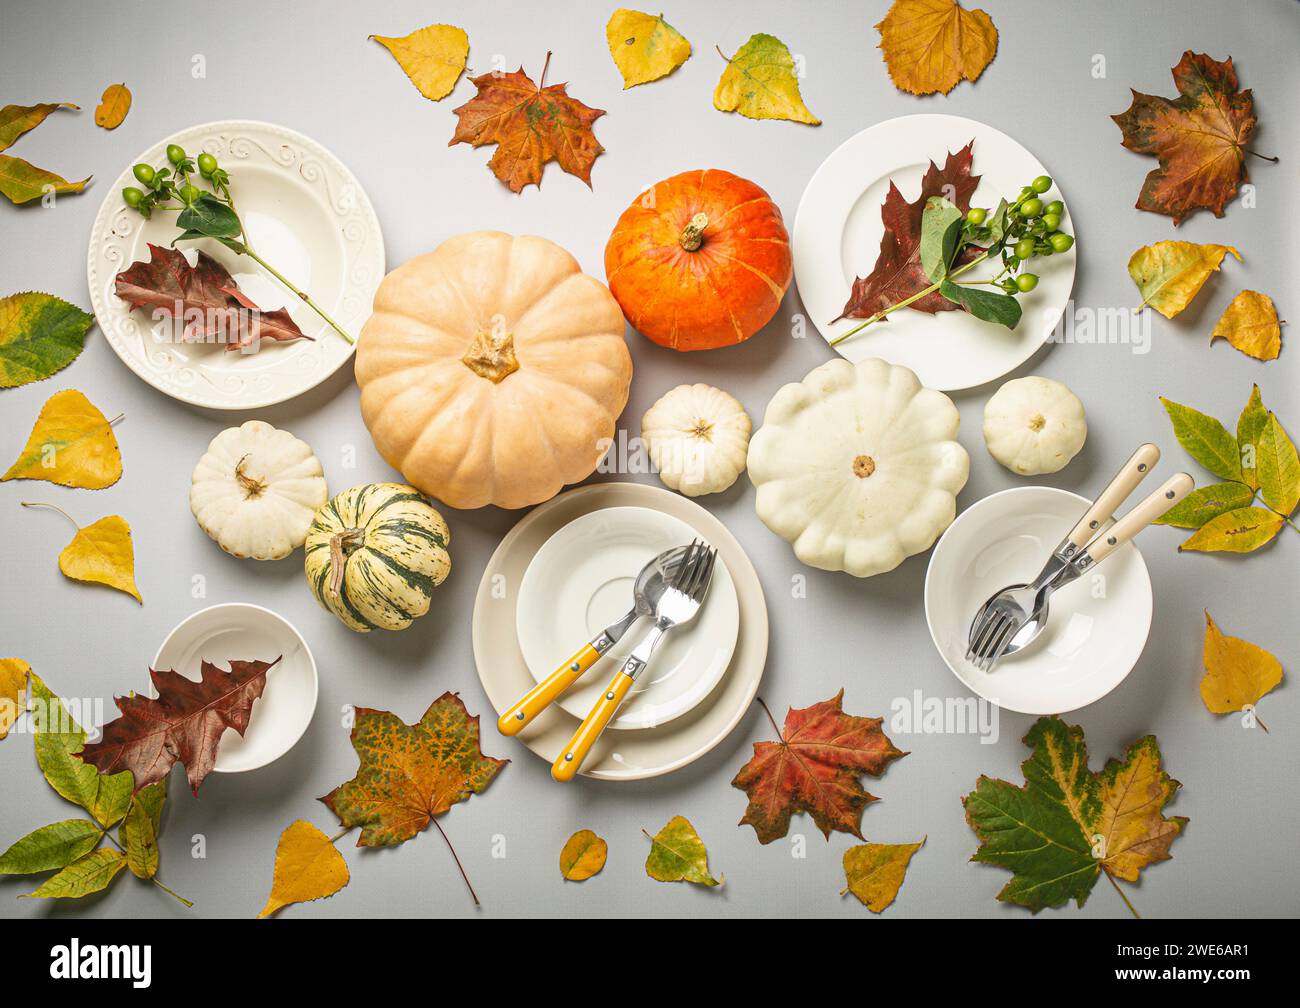 Various colorful pumpkins, autumn leaves and empty plates with cutlery for Thanksgiving Stock Photo